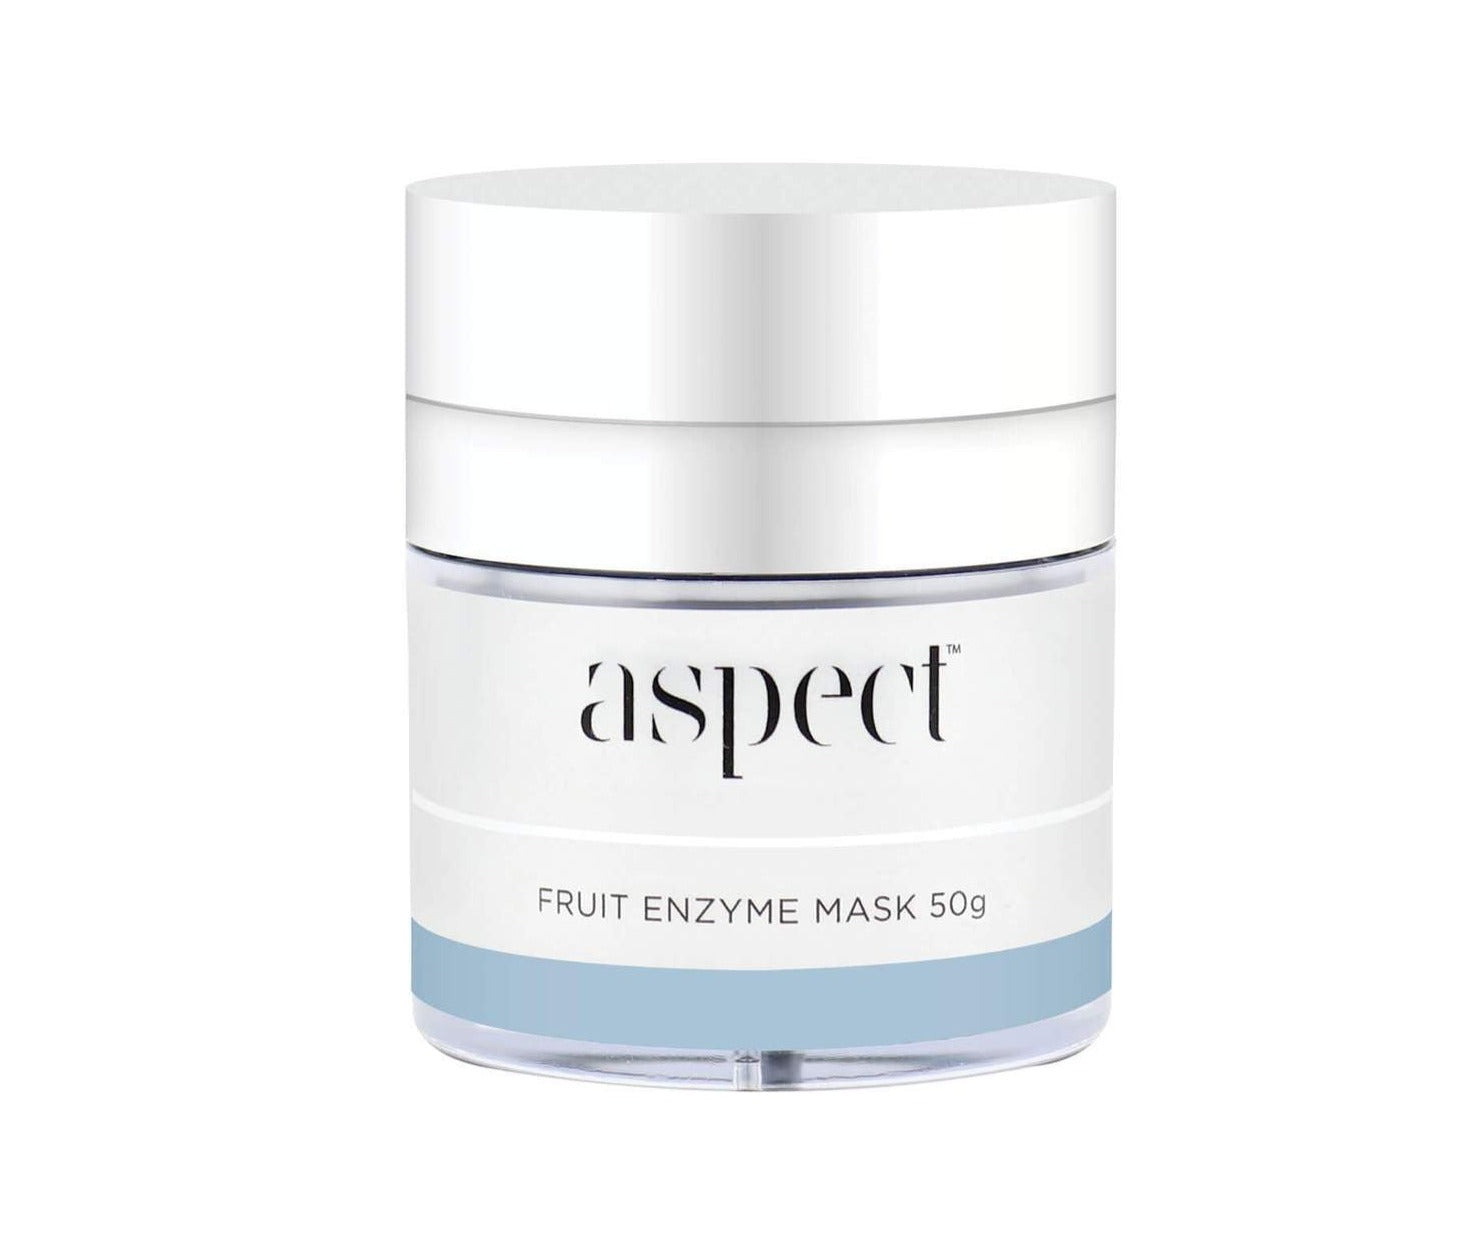 Invigorate skin with this exfoliating gel-mask. Harnessing the power of fruit enzymes to help remove lifeless skin cells, revealing a smoother, more radiant looking appearance.